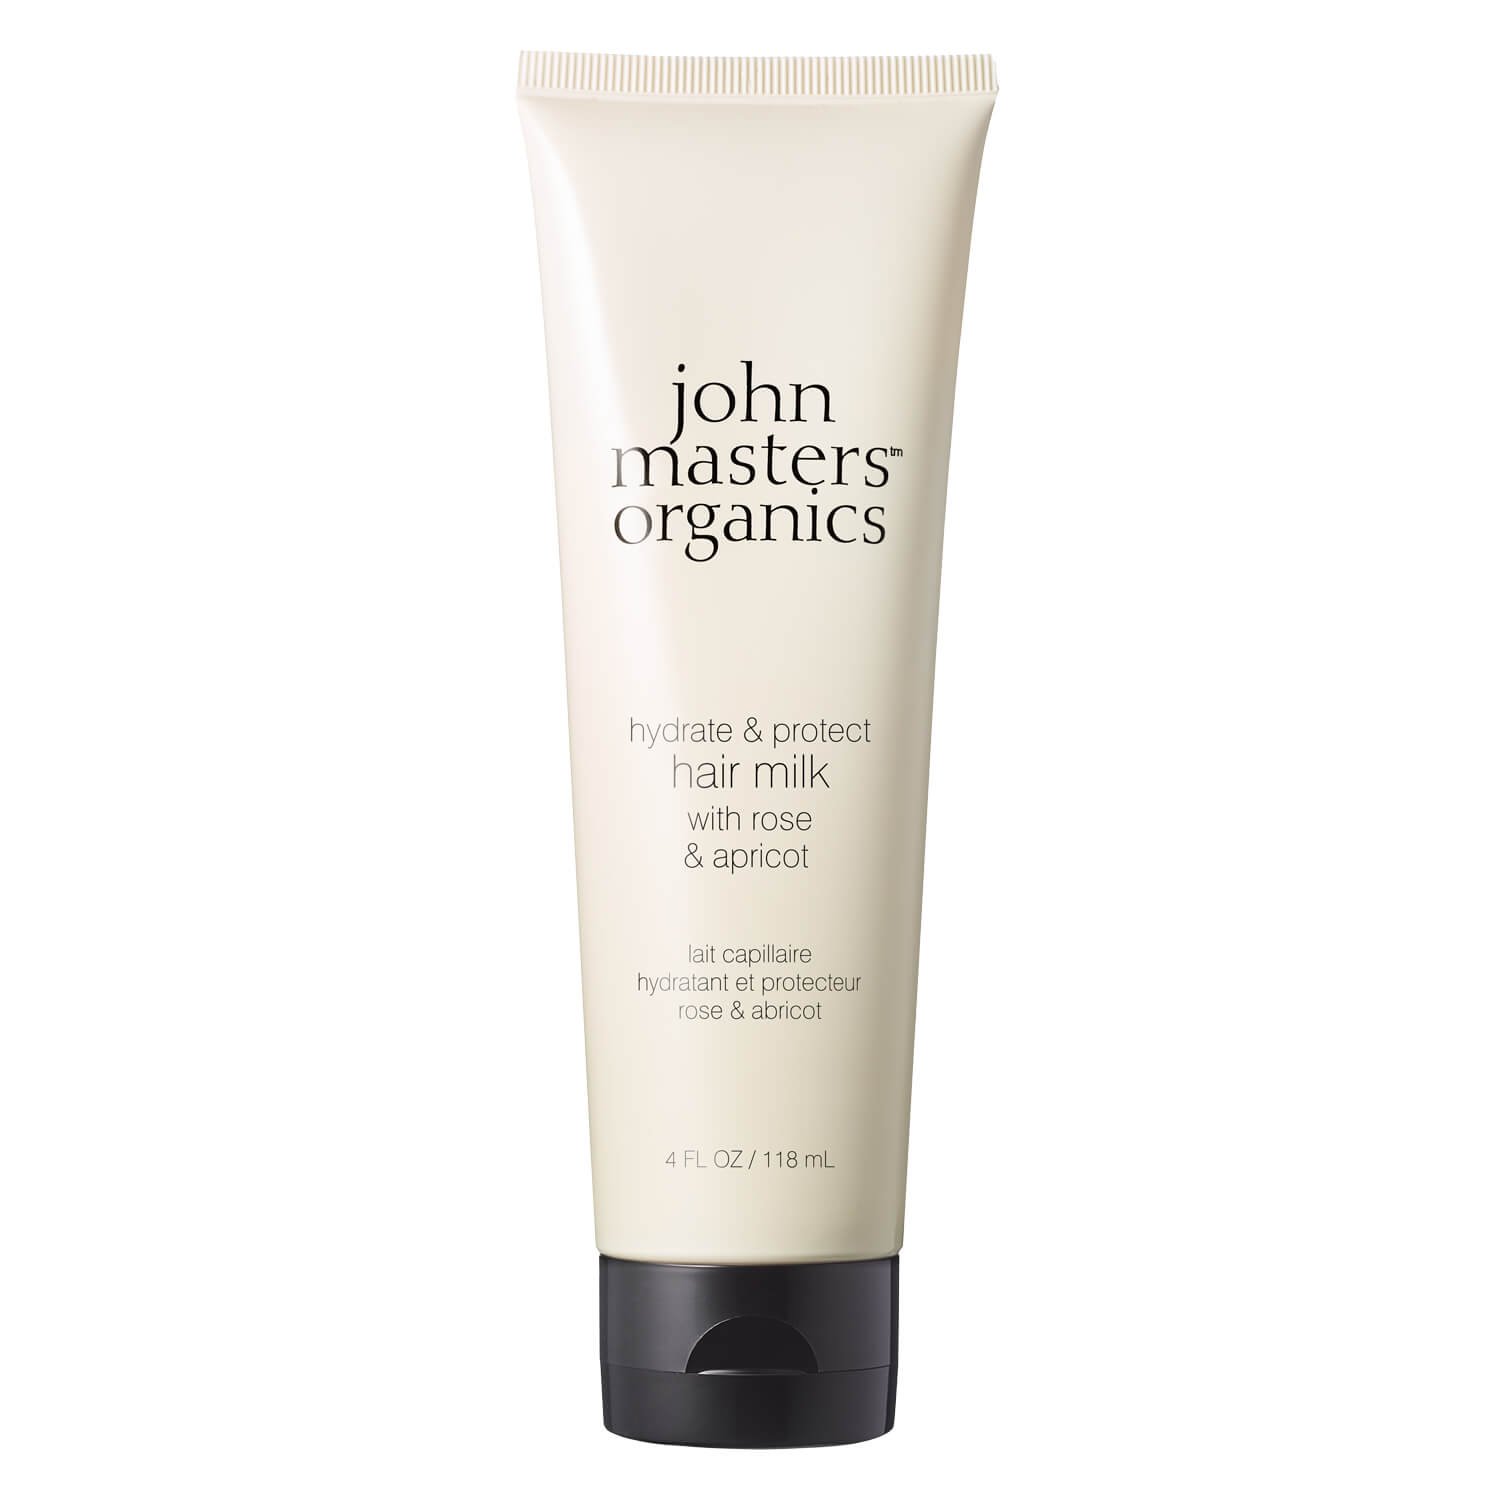 John Masters Organics Hair Milk hydrate & protect with Rose & Apricot